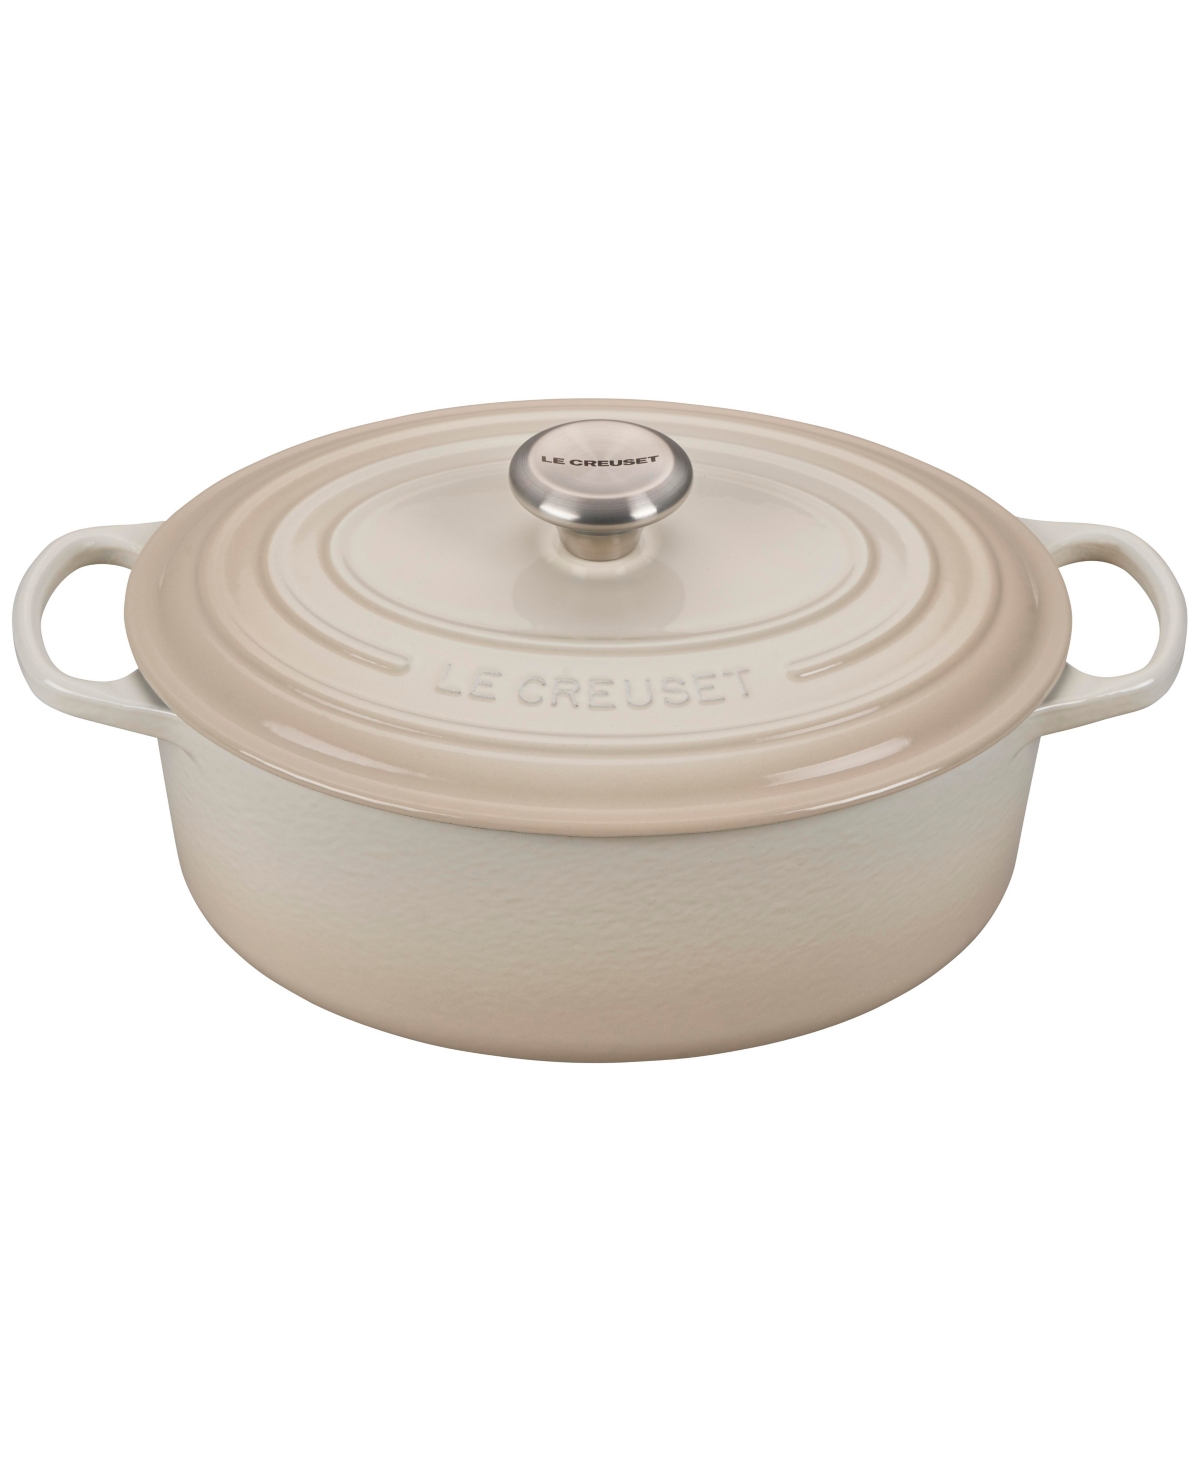 Le Creuset Signature Enameled Cast Iron 9.5 Qt. Oval French Oven